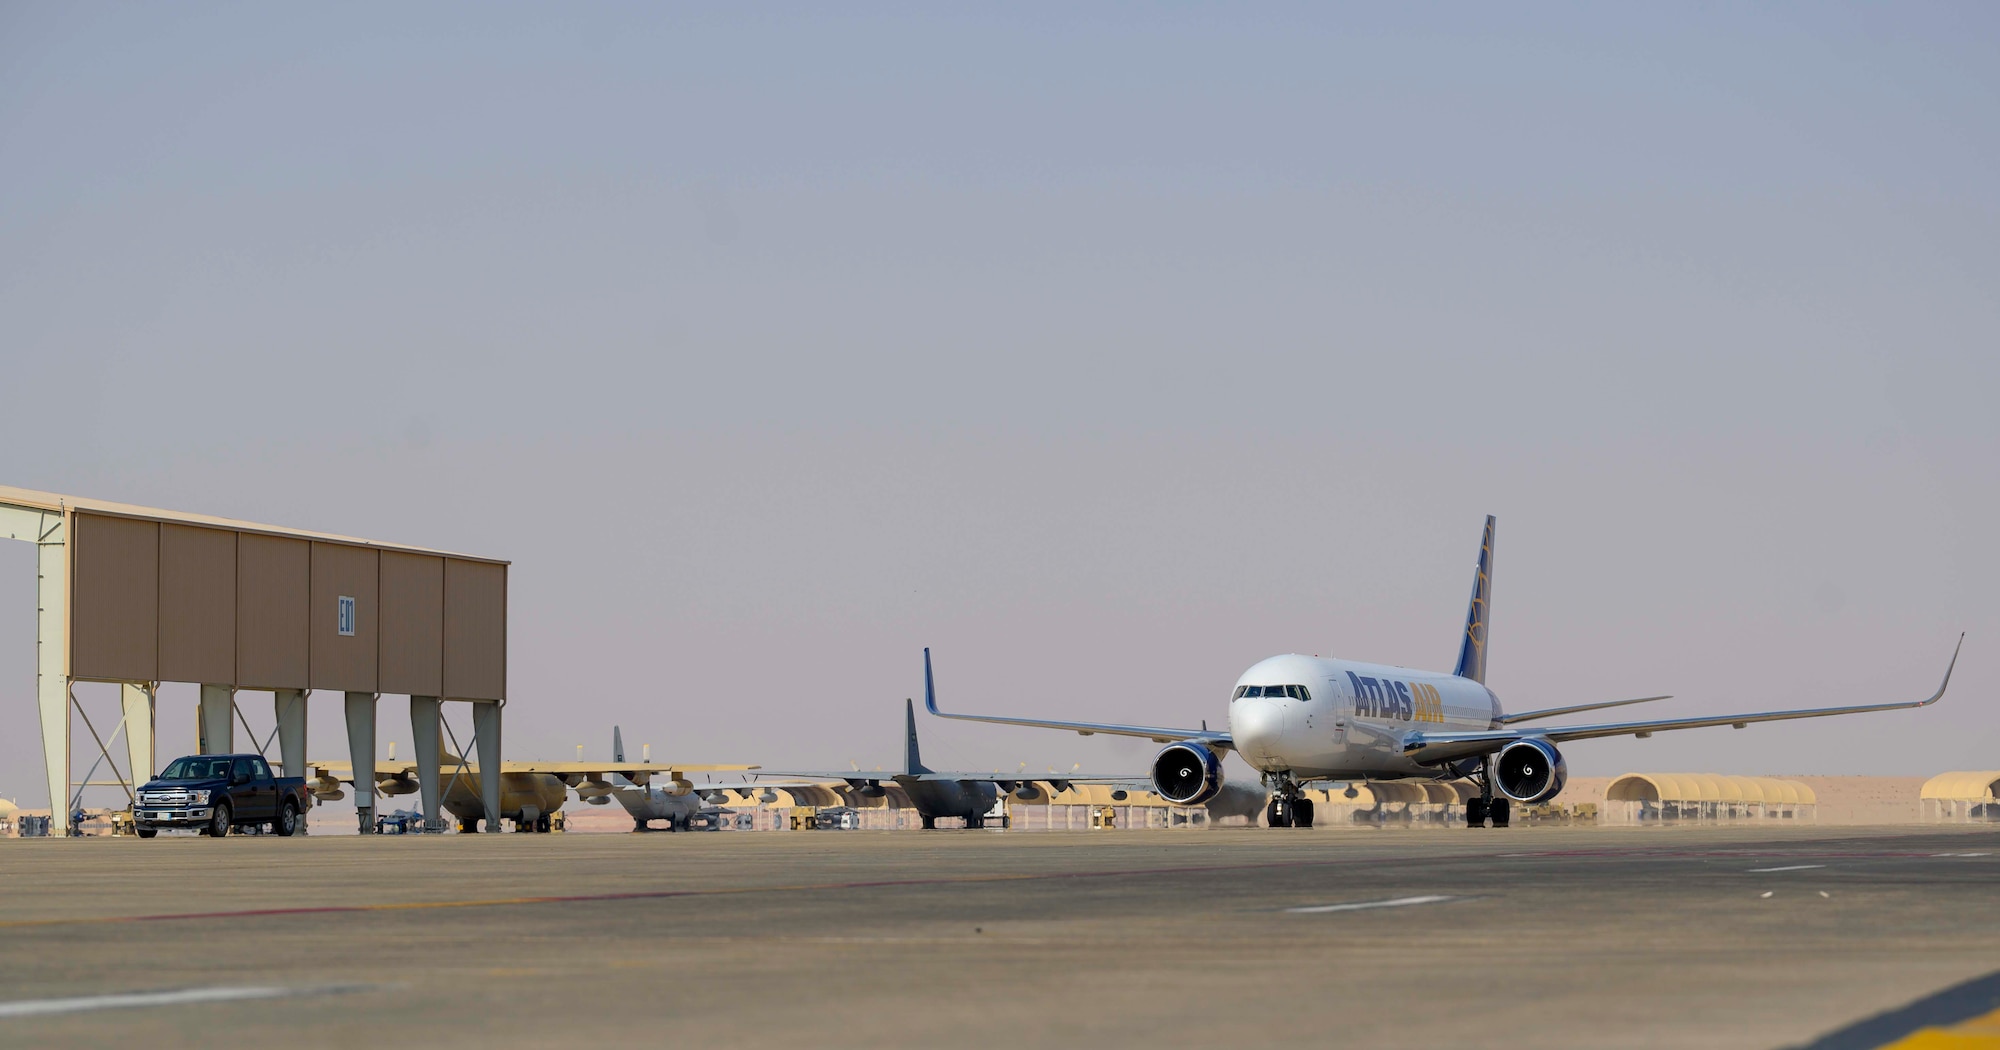 An aircraft carrying members of the District of Columbia Air National Guard’s 113th Wing, known as the “Capital Guardians,” taxis on the flight line upon arrival at Prince Sultan Air Base, Kingdom of Saudi Arabia, July 11, 2021. The wing deployed a contingent of U.S. Air Force F-16 Fighting Falcons to PSAB to reinforce the base’s defensive capabilities, provide operational depth, and support U.S. Central Command operations in the region. (U.S. Air Force Photo by Senior Airman Samuel Earick)